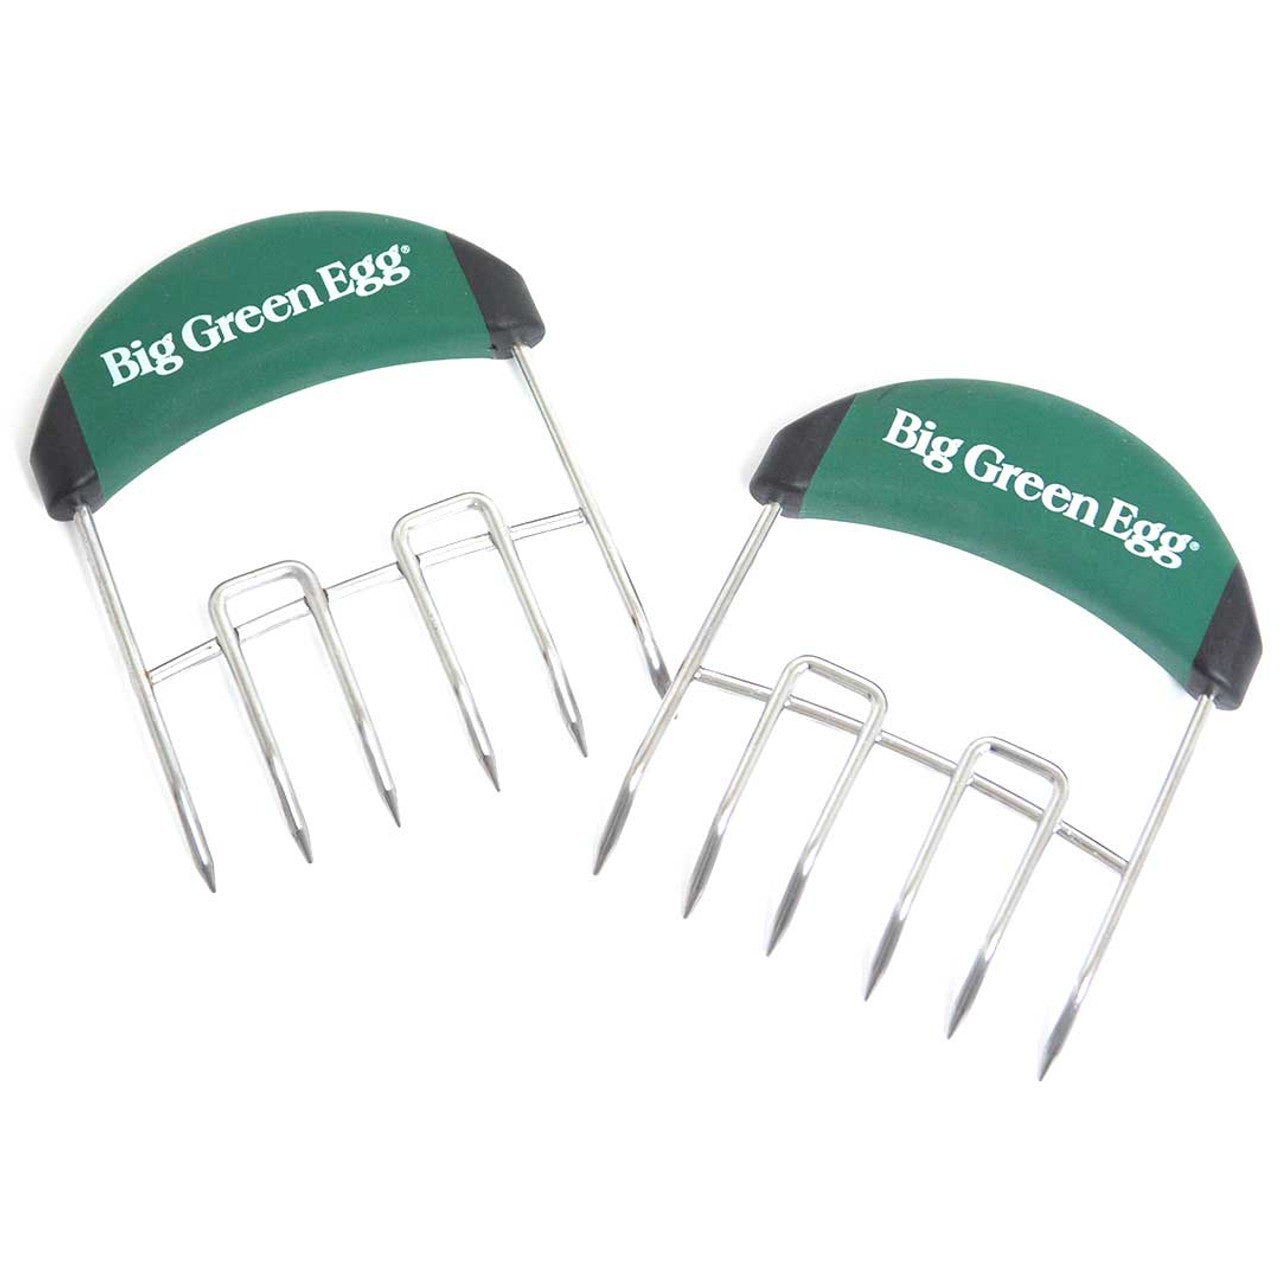 Big Green Egg Stainless Steel Meat Claws, Soft Grip Handles